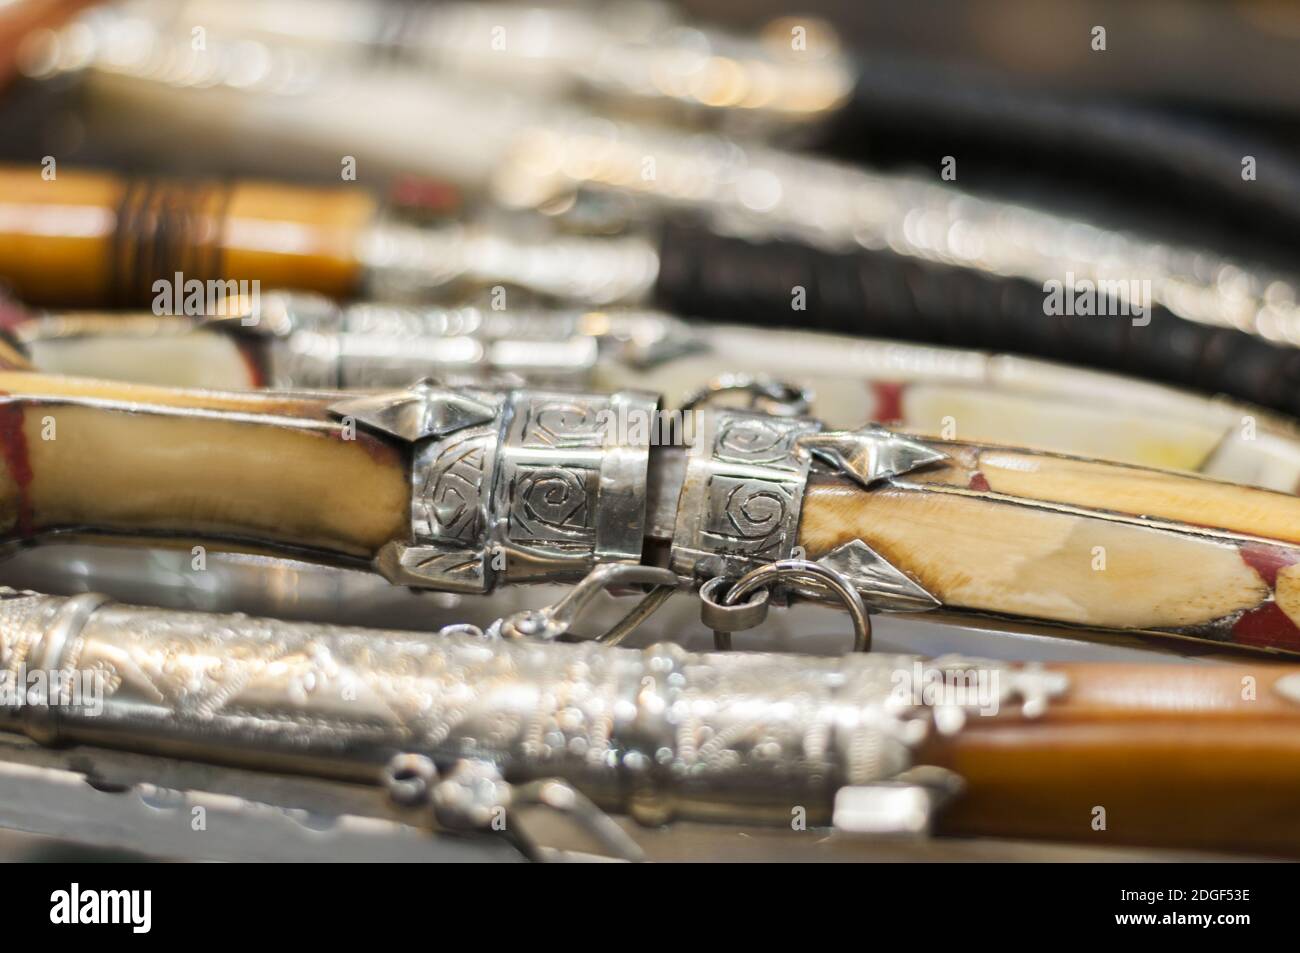 Background of different oriental daggers in a souk. Stock Photo